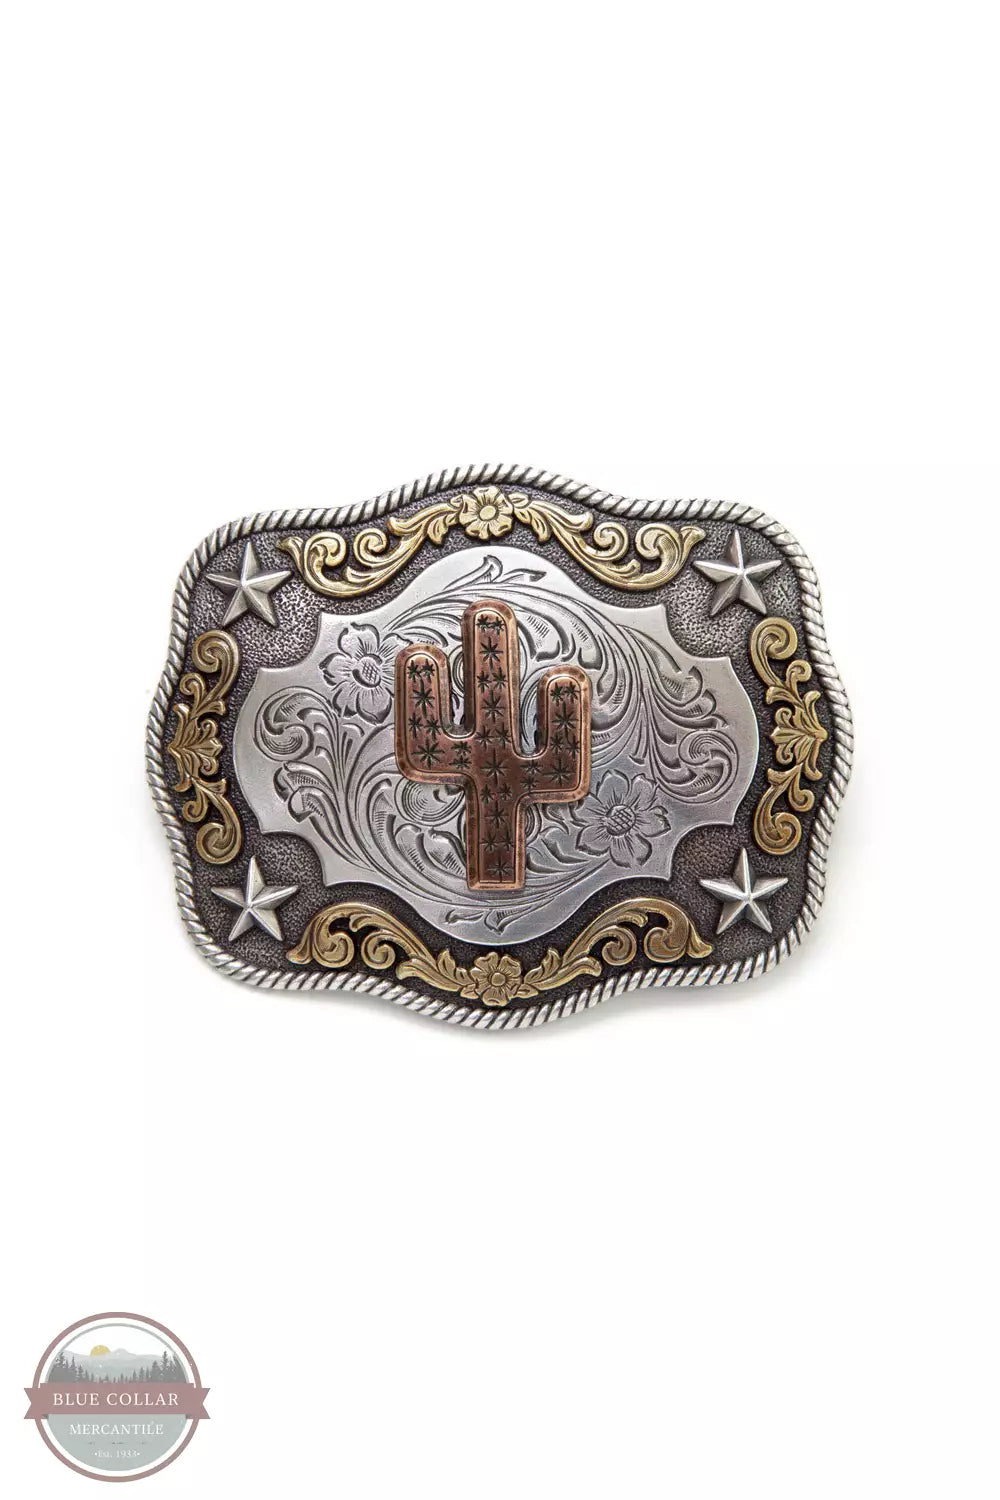 Nocona 37400 Copper Cactus Buckle with Rope Edge Front View